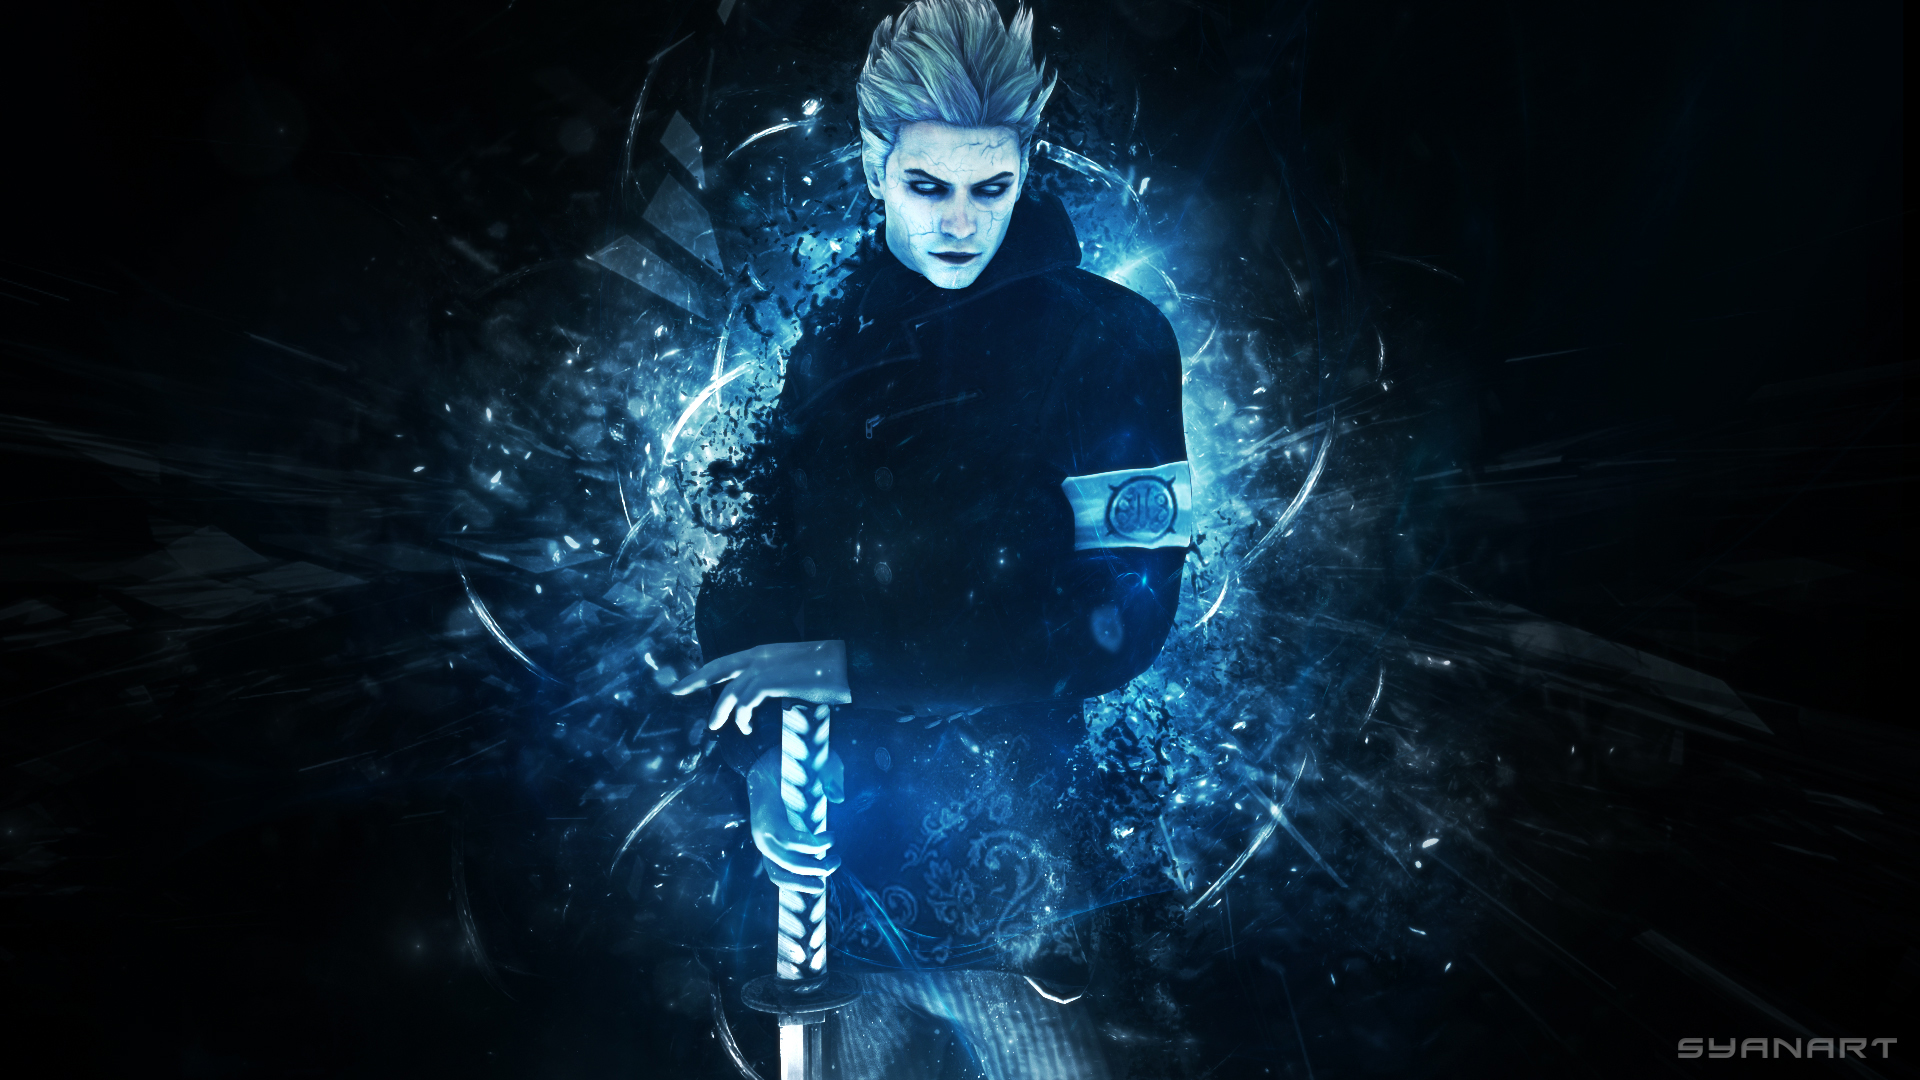 Handy-Wallpaper Devil May Cry, Computerspiele, Dmc: Devil May Cry, Vergil (Devil May Cry) kostenlos herunterladen.